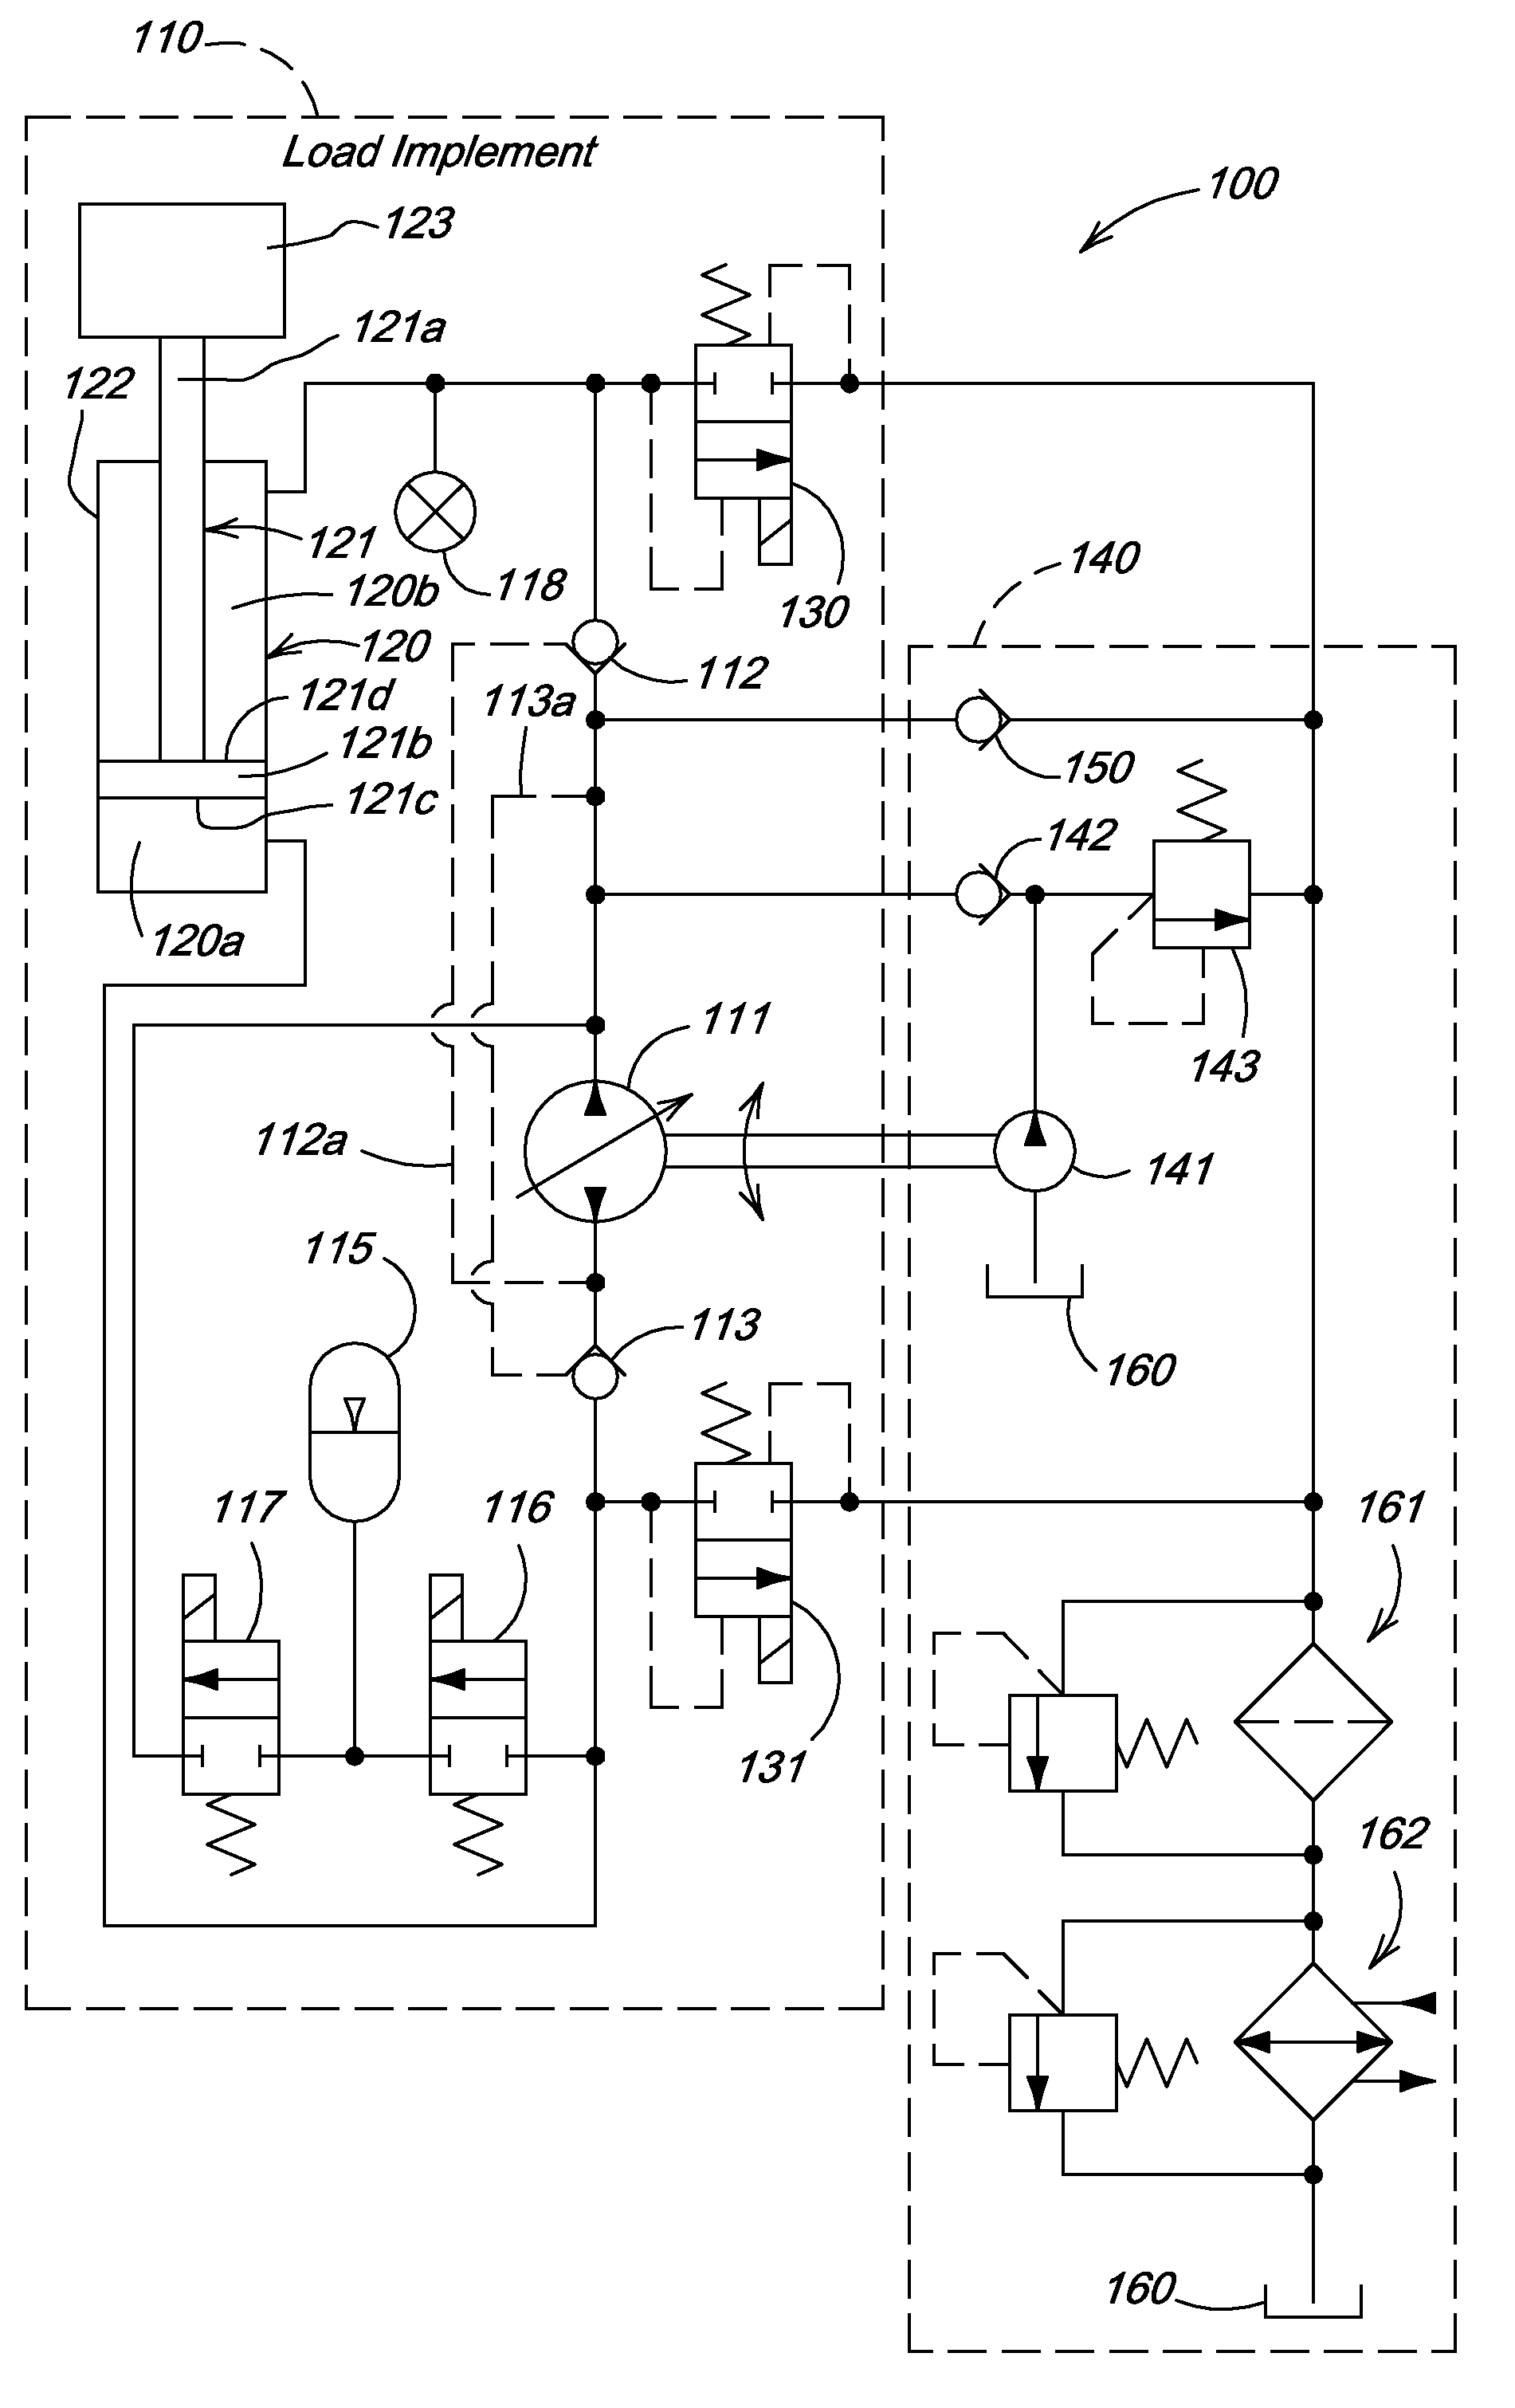 Closed circuit energy recovery system for a work implement